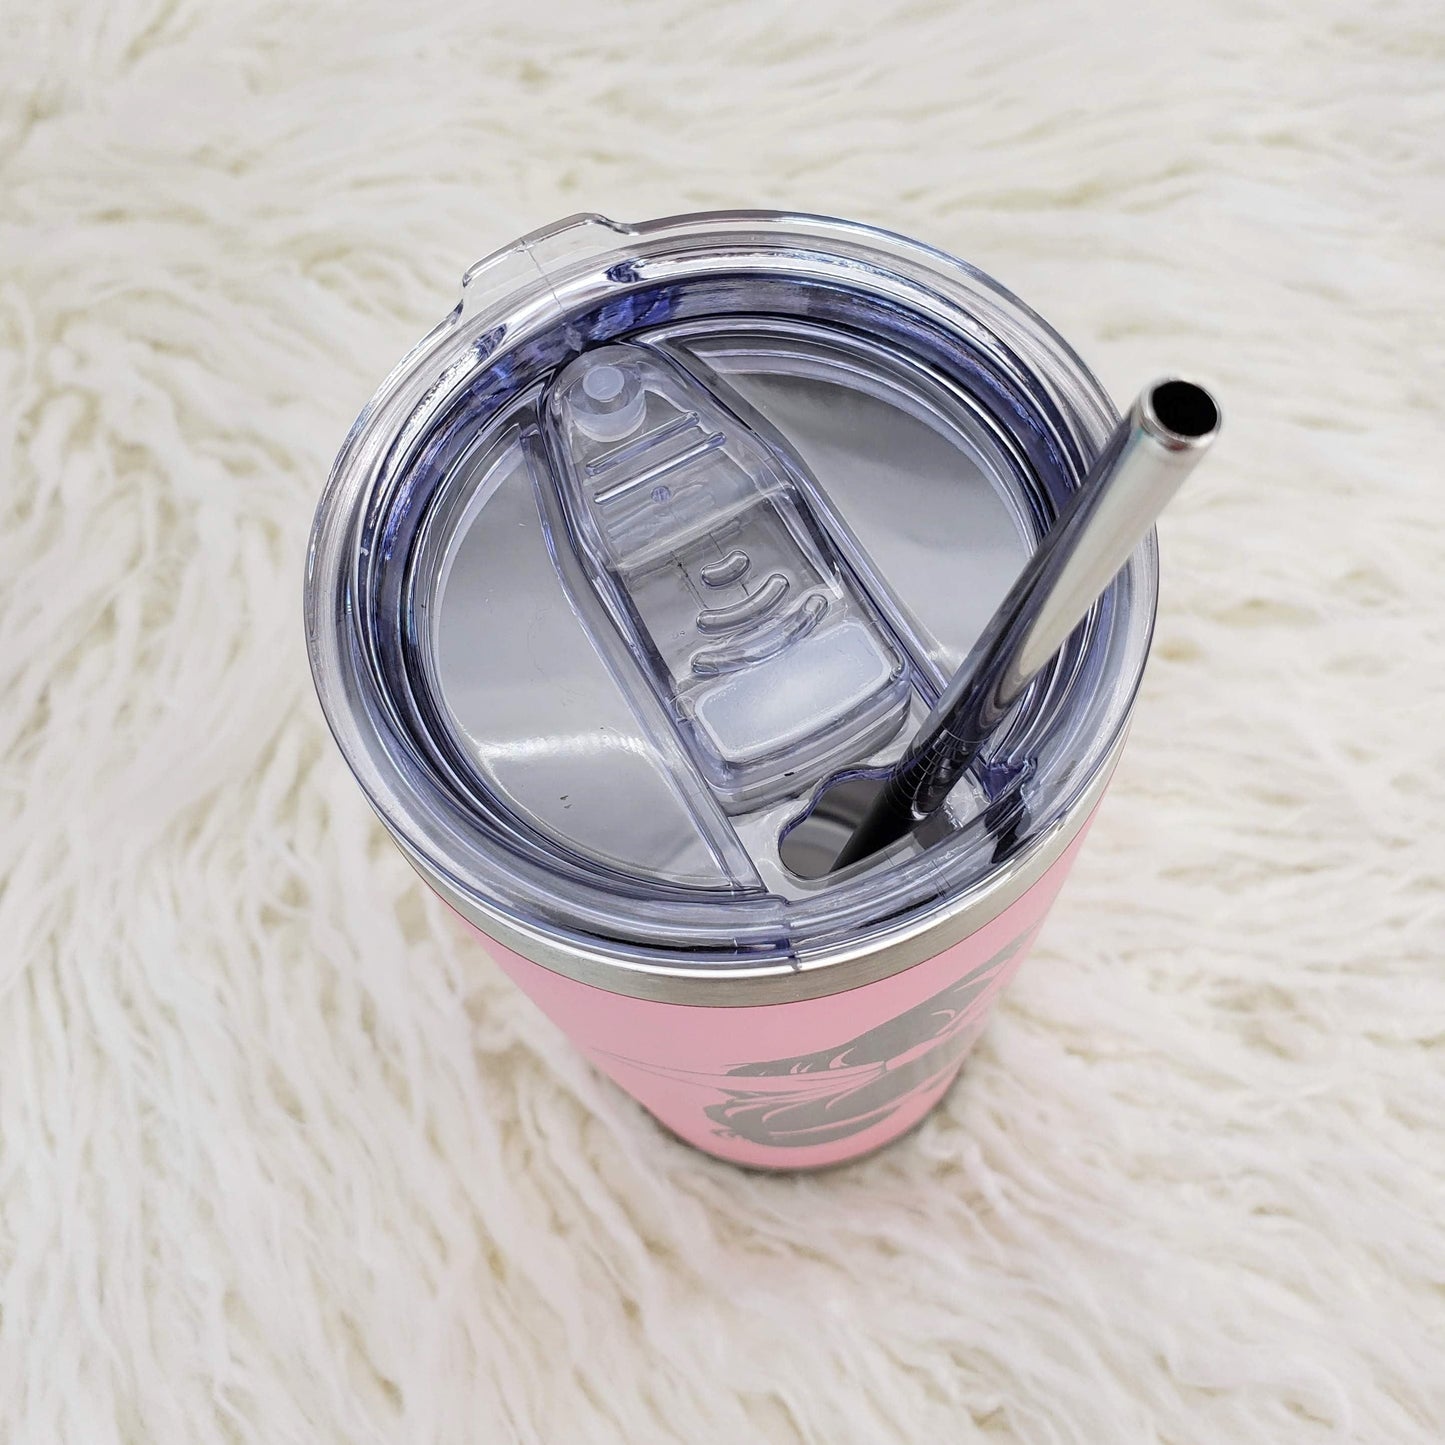 Laser Engraved Script Name Tumbler - 20oz Hot Tumbler with Silver Stainless Straw Laser Engraved Script Name Tumbler - 20oz Hot Tumbler with Stainless Straw Mugs Candy Wrapper Store